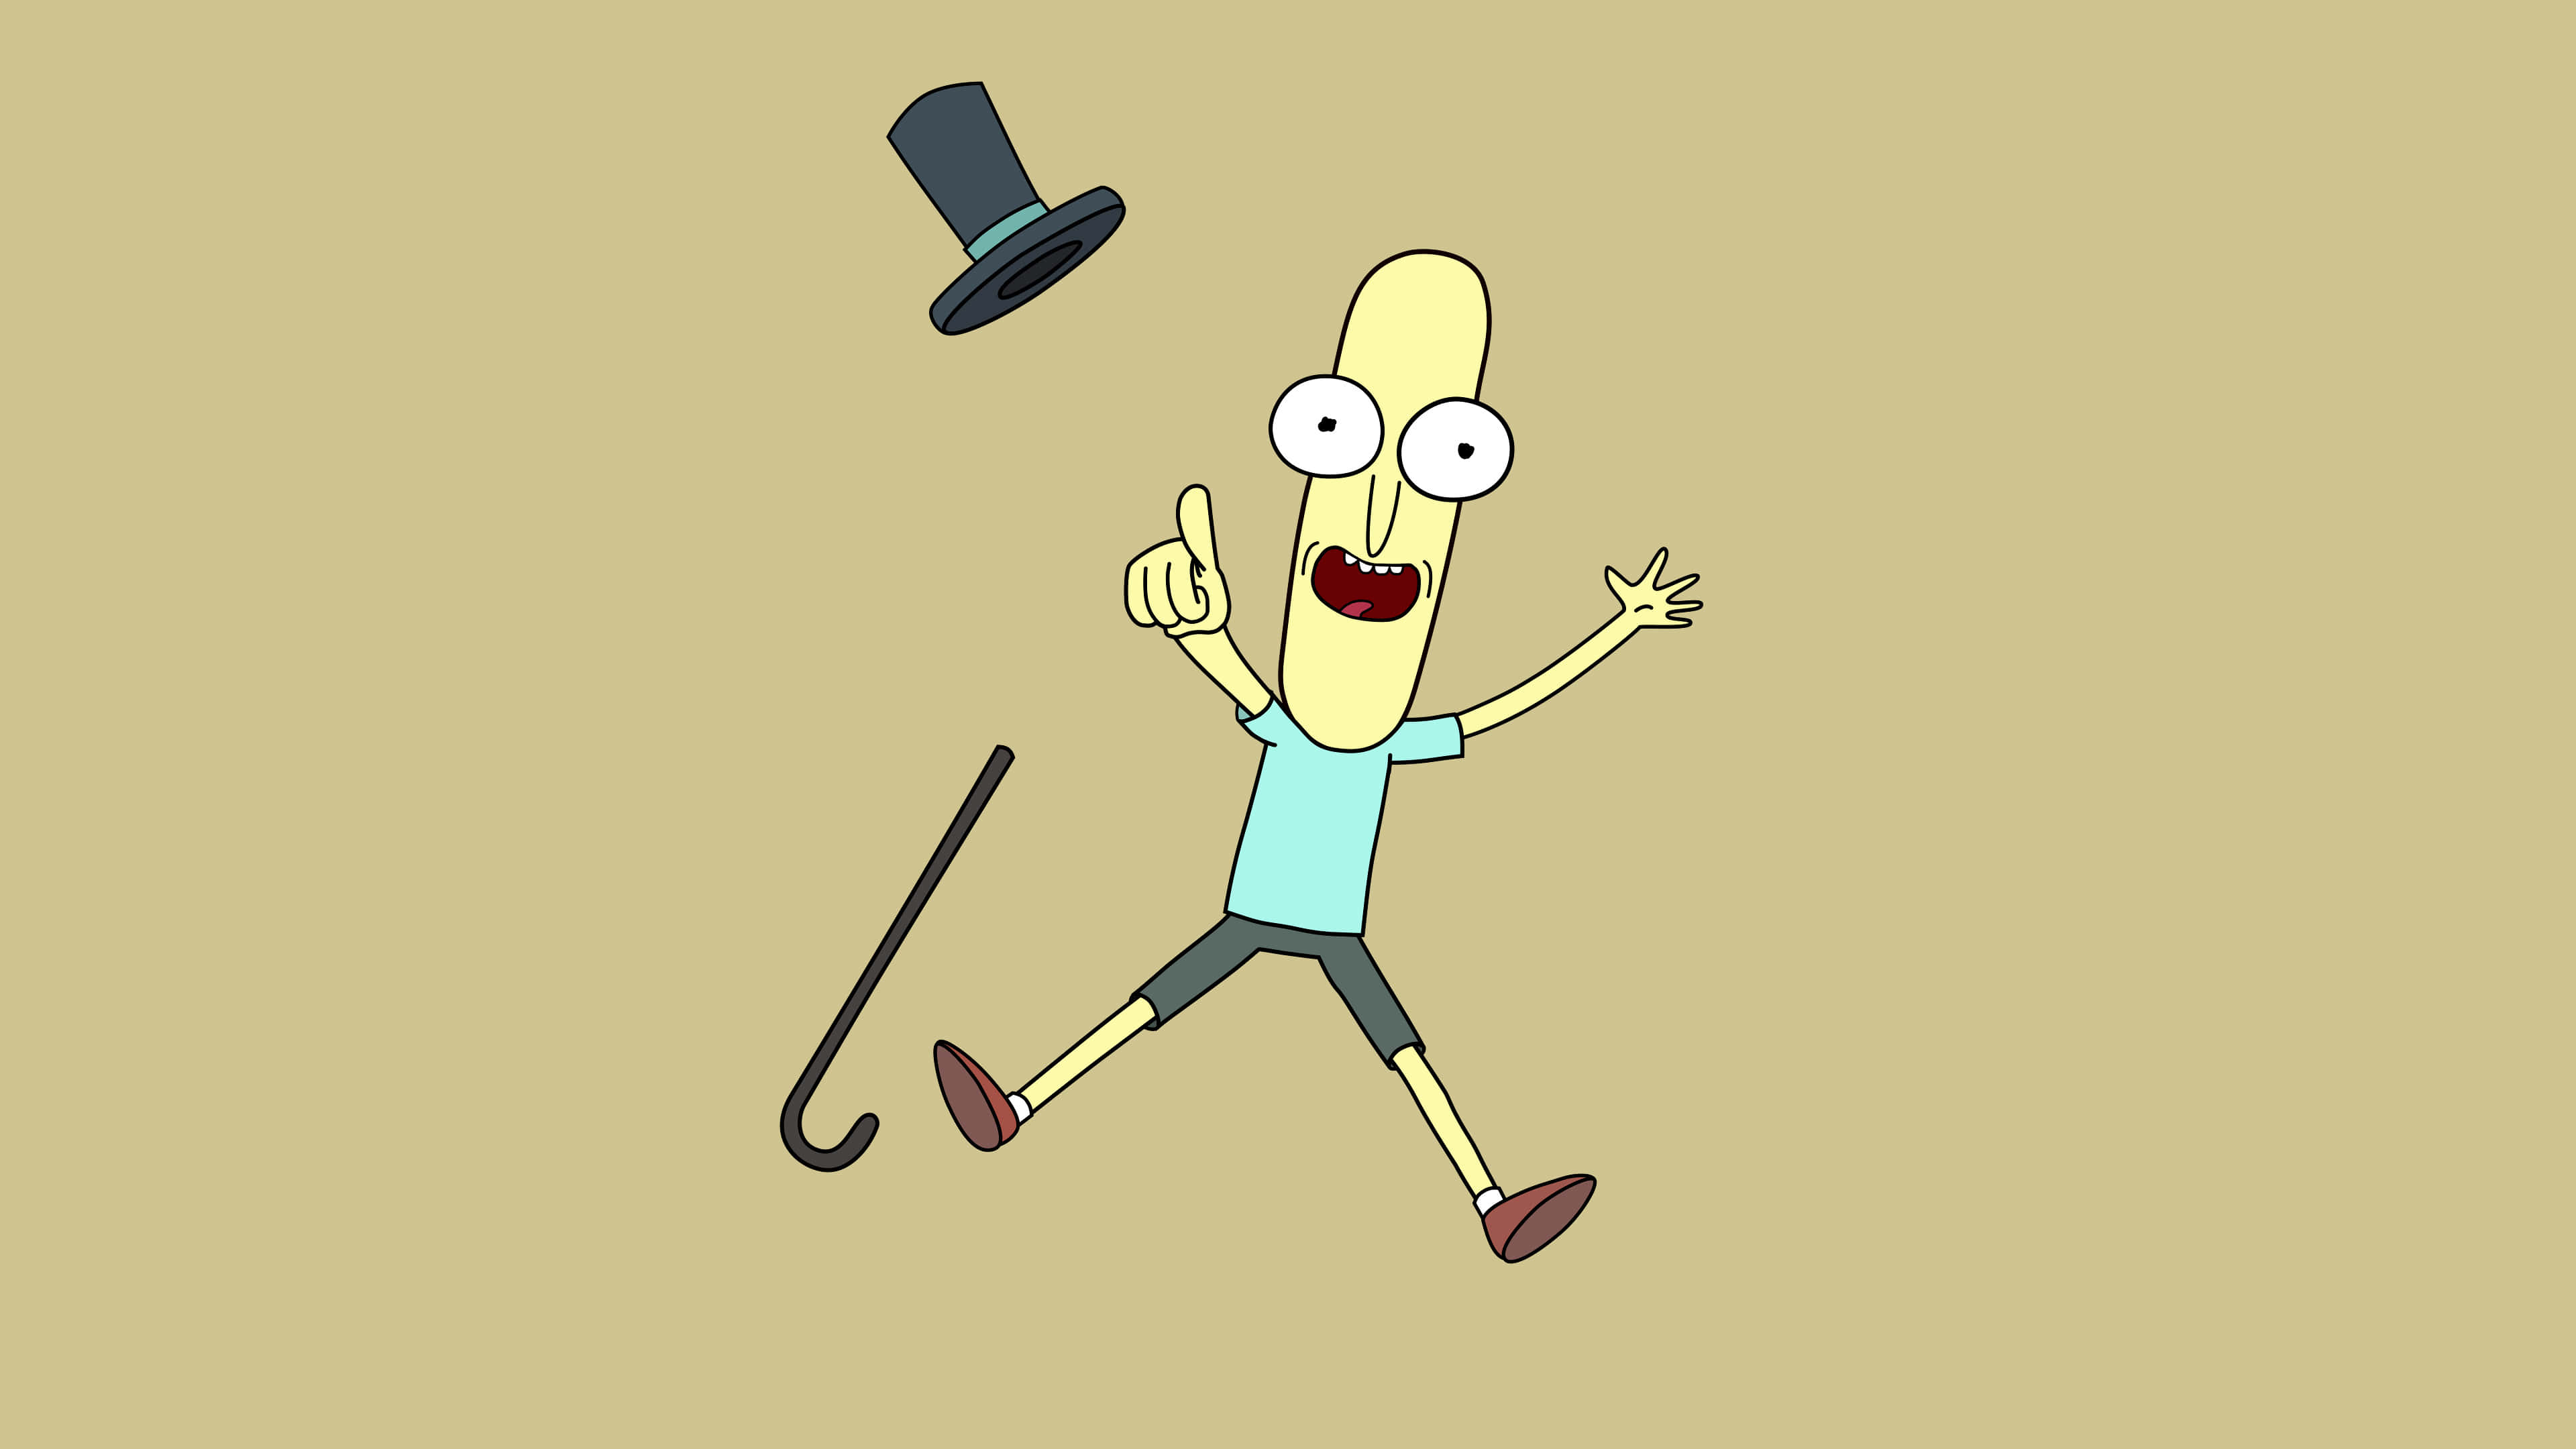 Mr. Poopybutthole from the hit animated series, Rick and Morty, posing happily on a cosmic background. Wallpaper